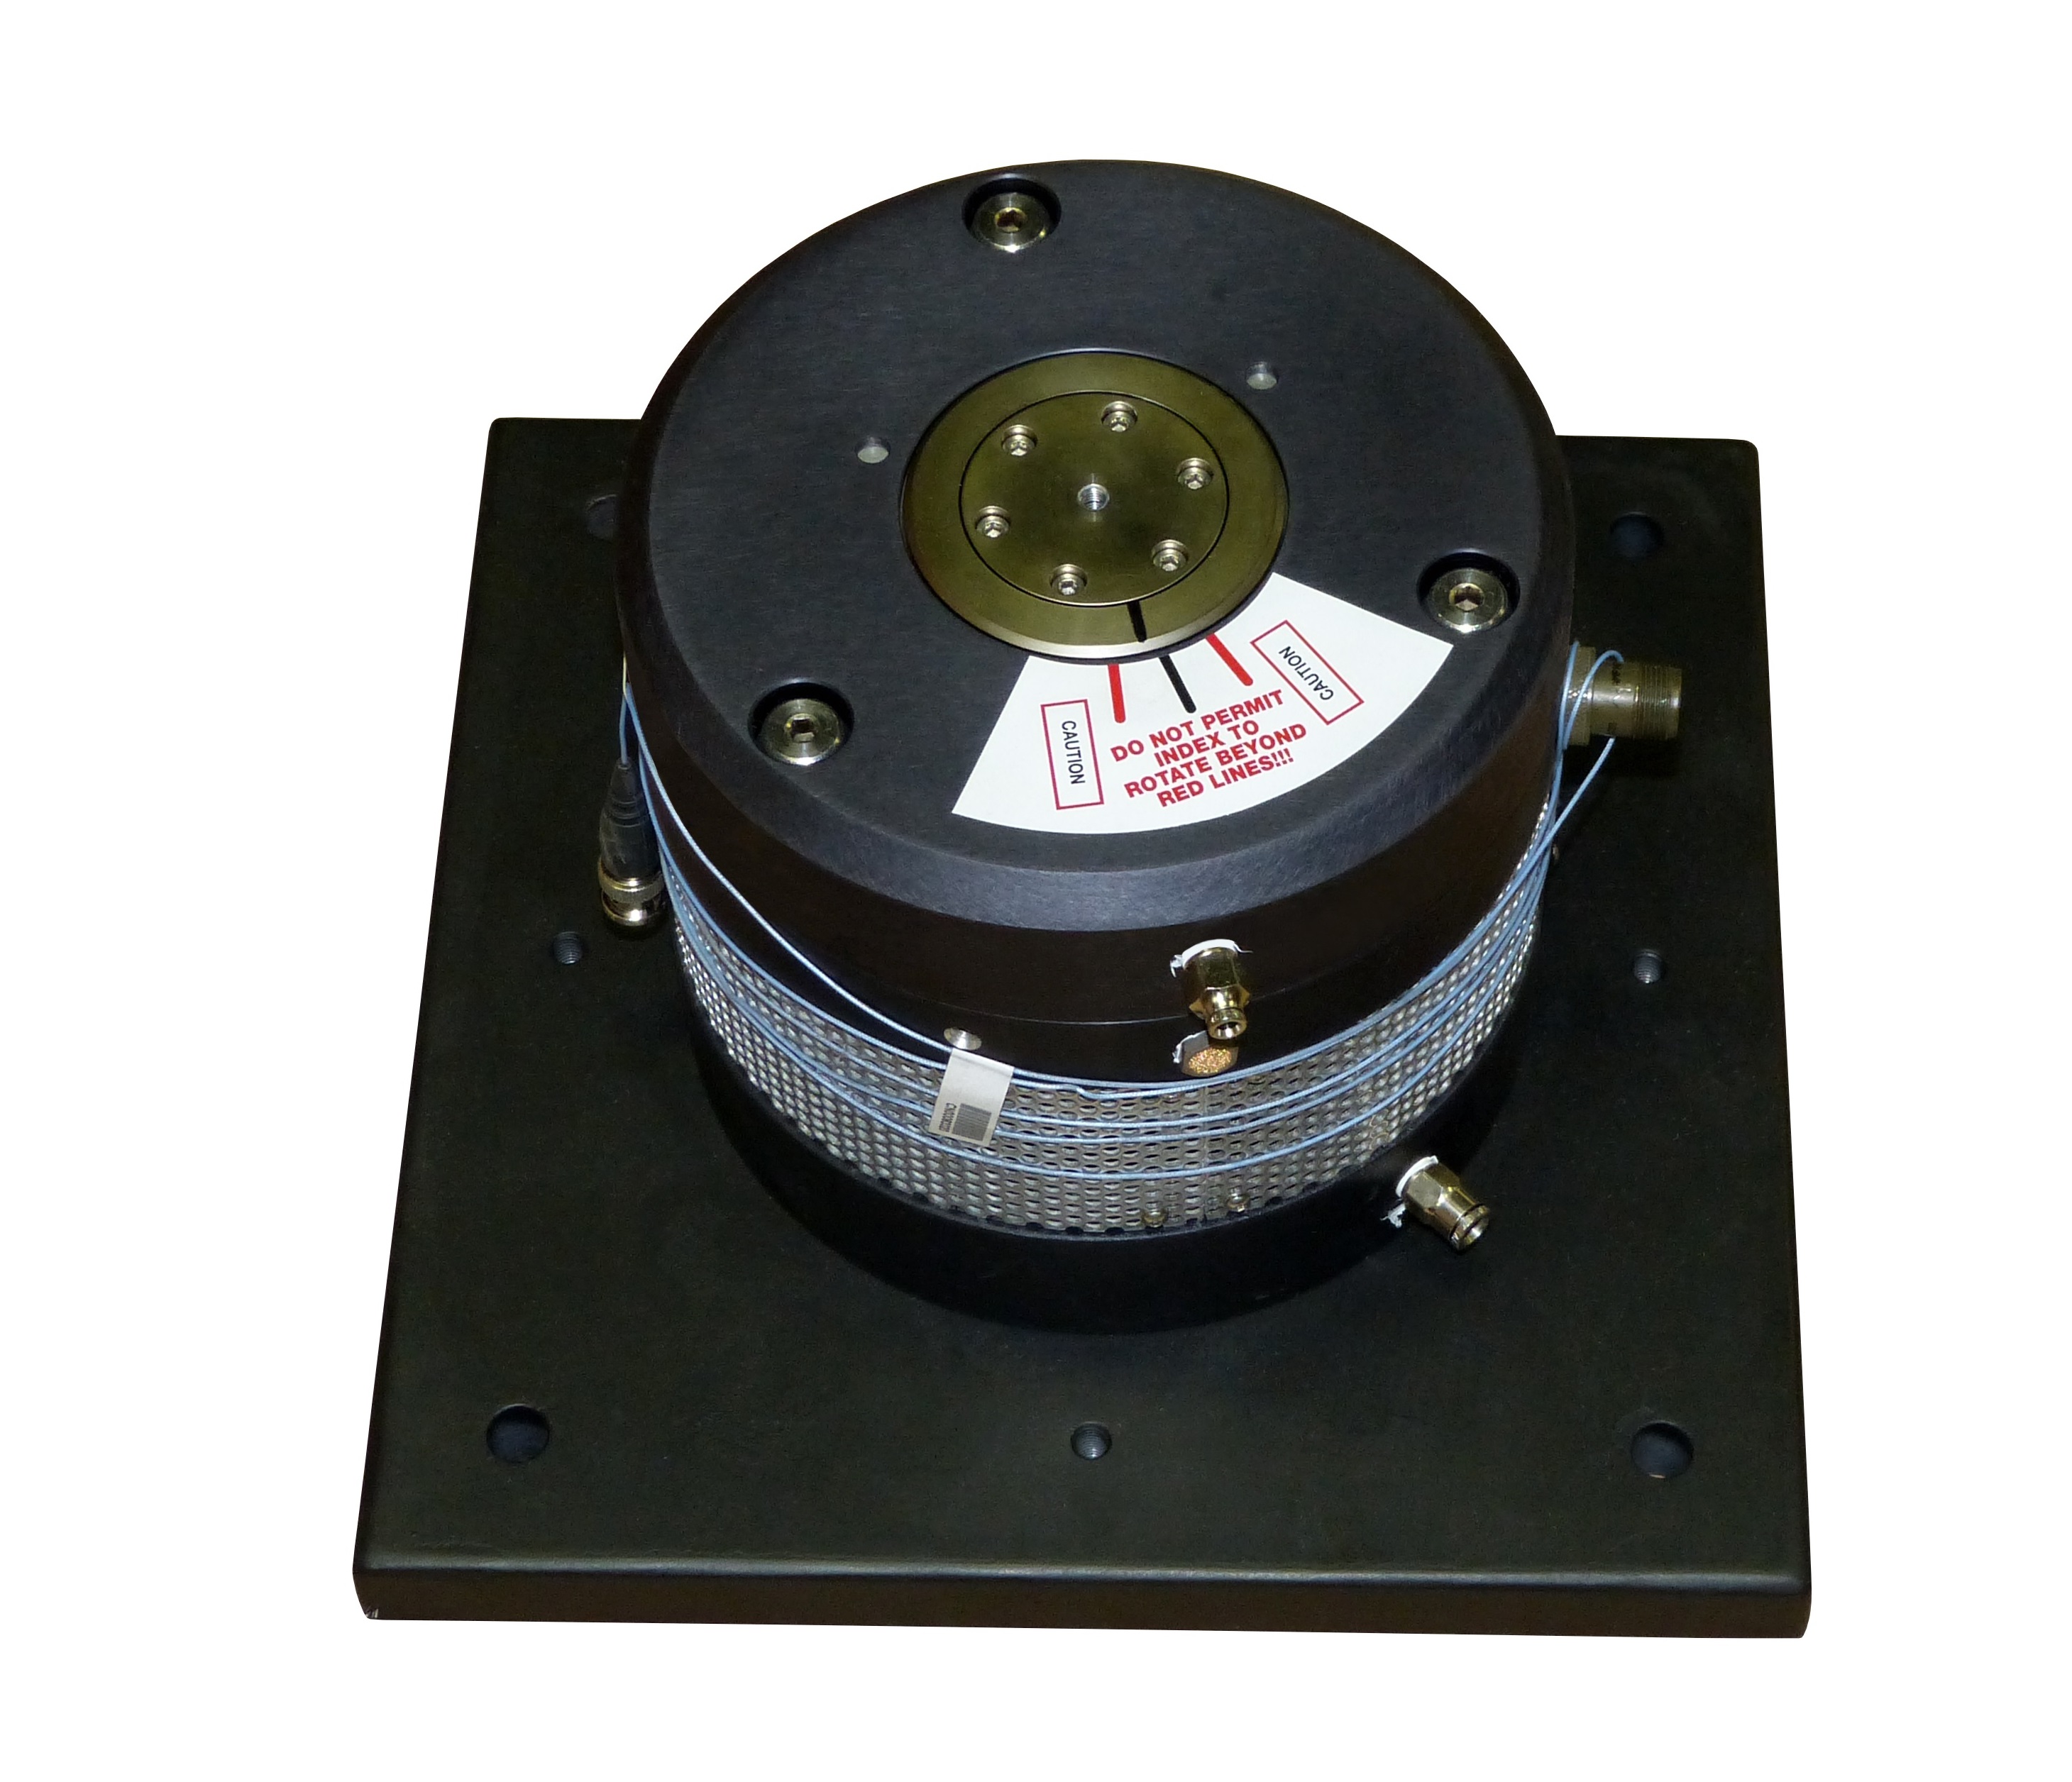 High-Frequency Air Bearing Vibration Exciter Intended for High-Volume Accelerometer Calibrations and Sensor Quality Assurance Testing